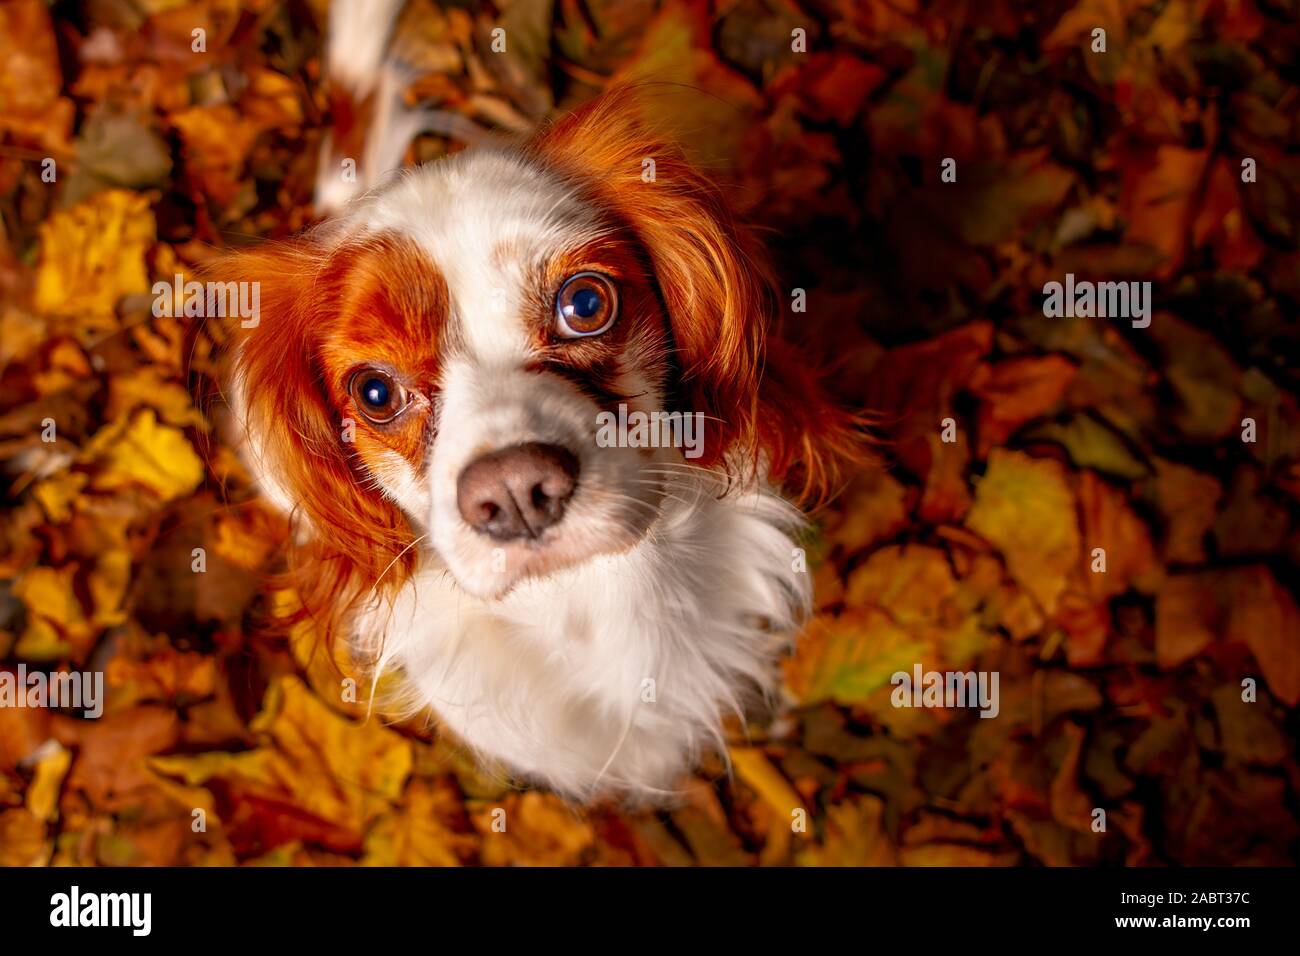 Portrait of a Cavalier King Sitting on Dry Leaves Stock Photo